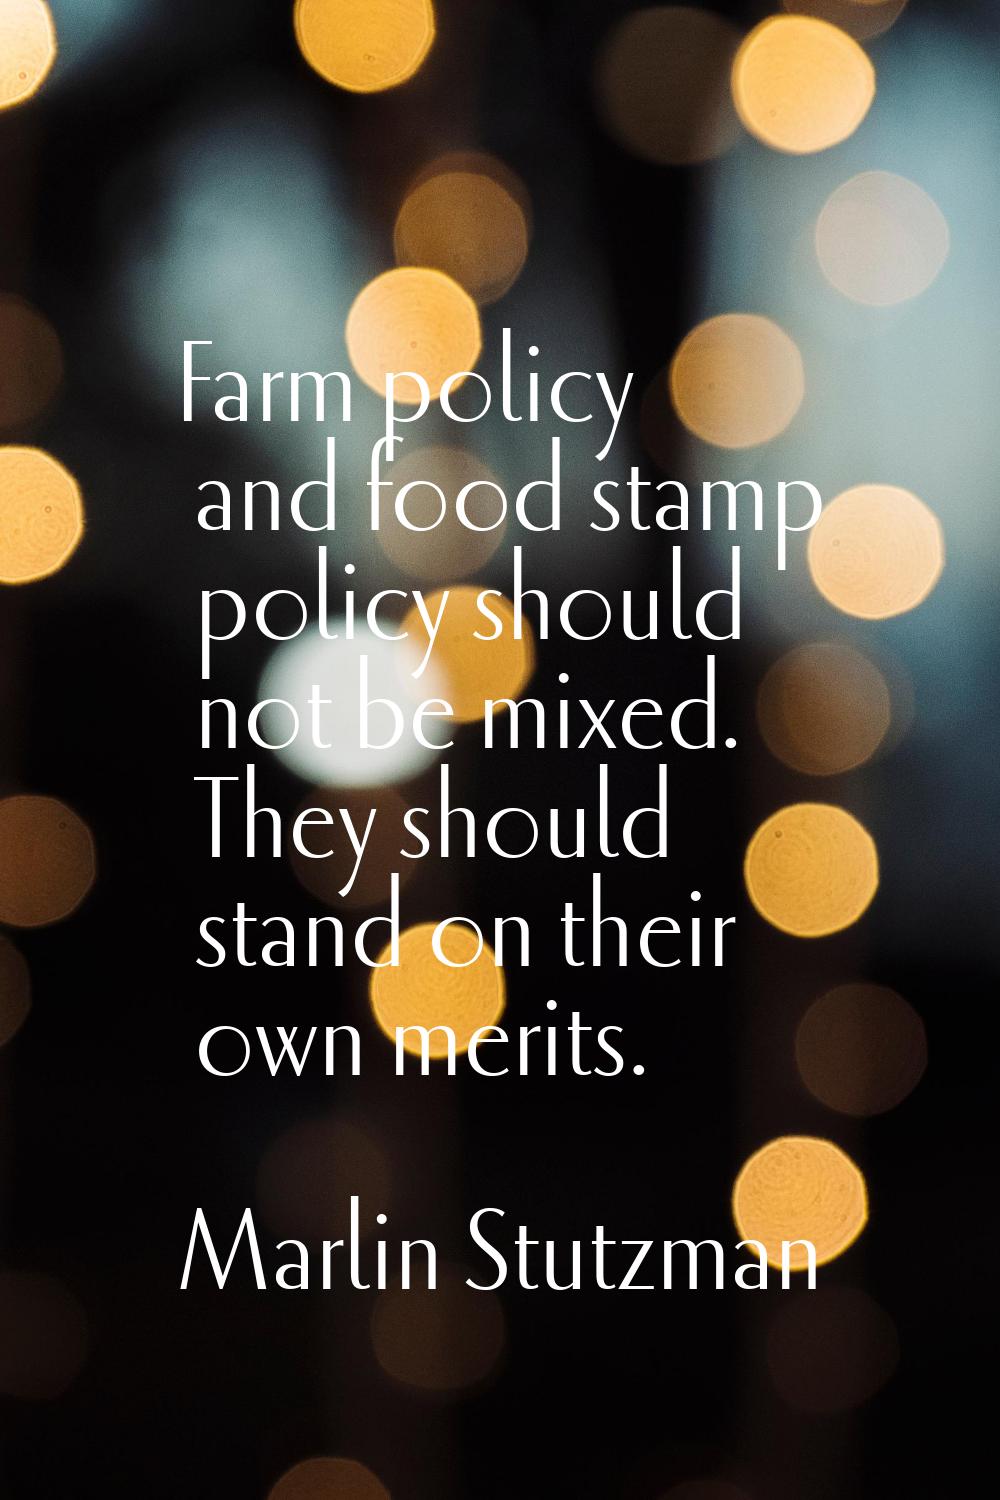 Farm policy and food stamp policy should not be mixed. They should stand on their own merits.